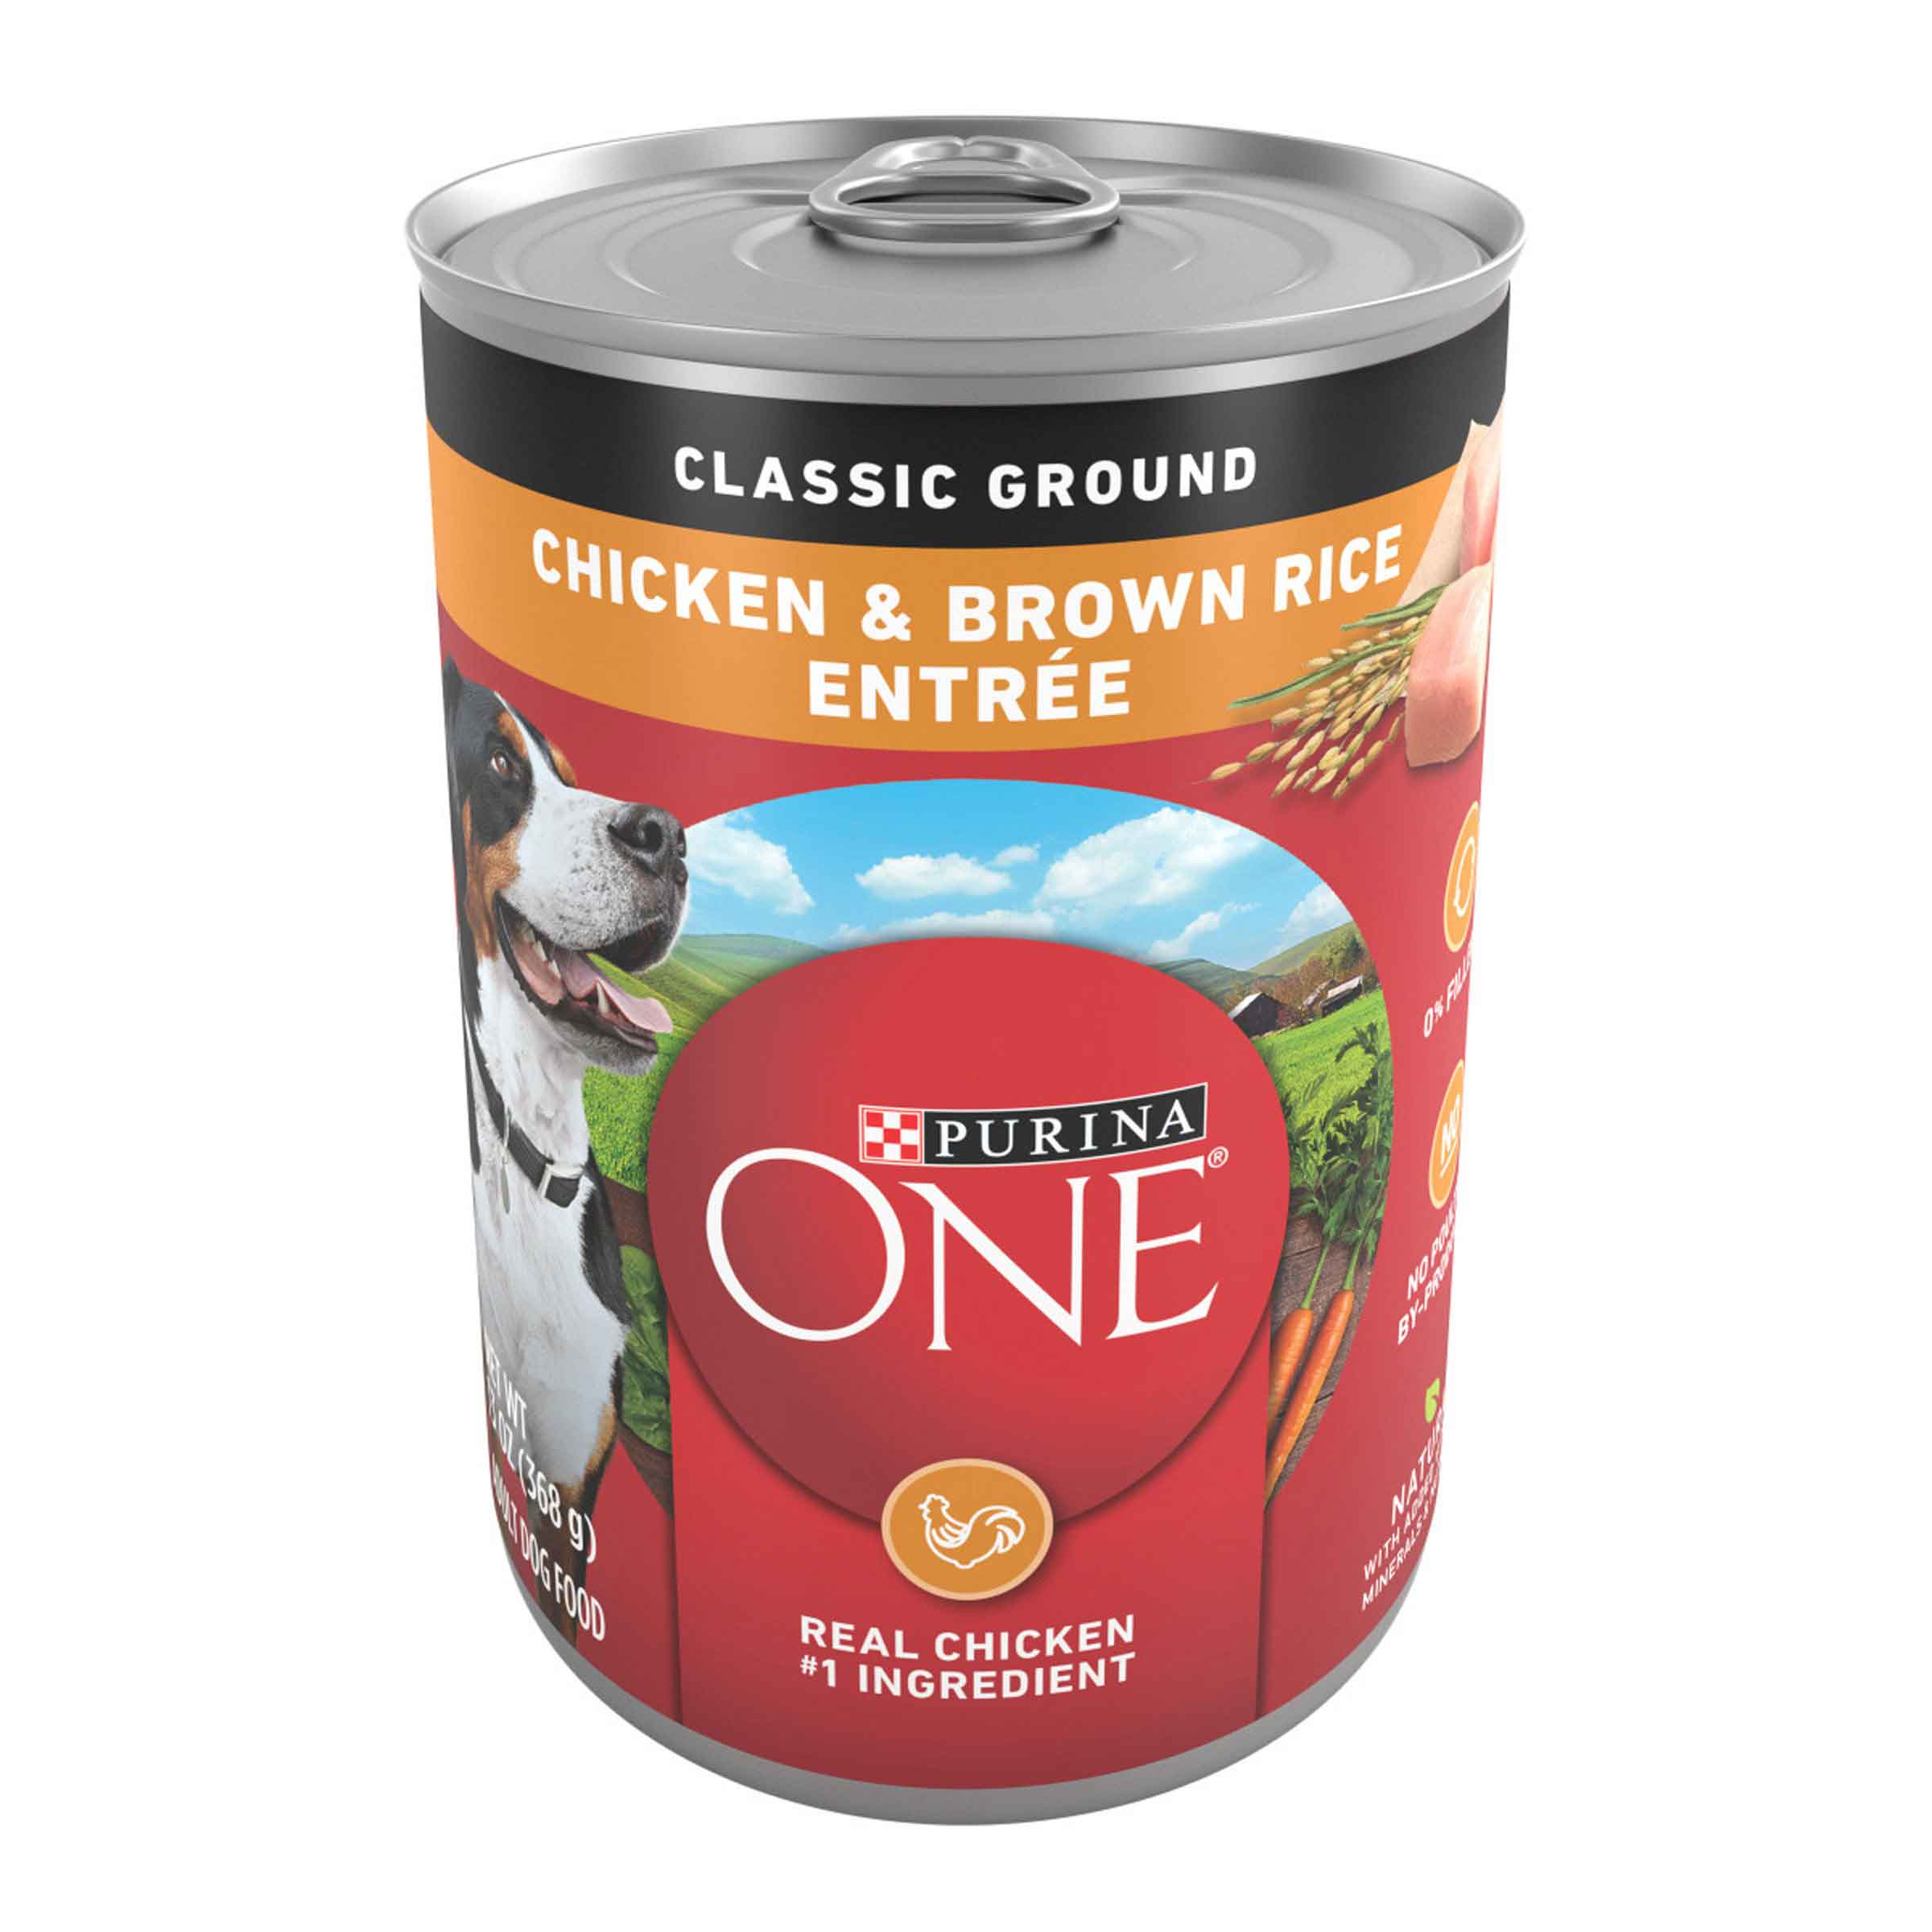 Purina ONE Natural Pate Wet Dog Food, SmartBlend Chicken & Brown Rice Entree - 13 Ounce Can